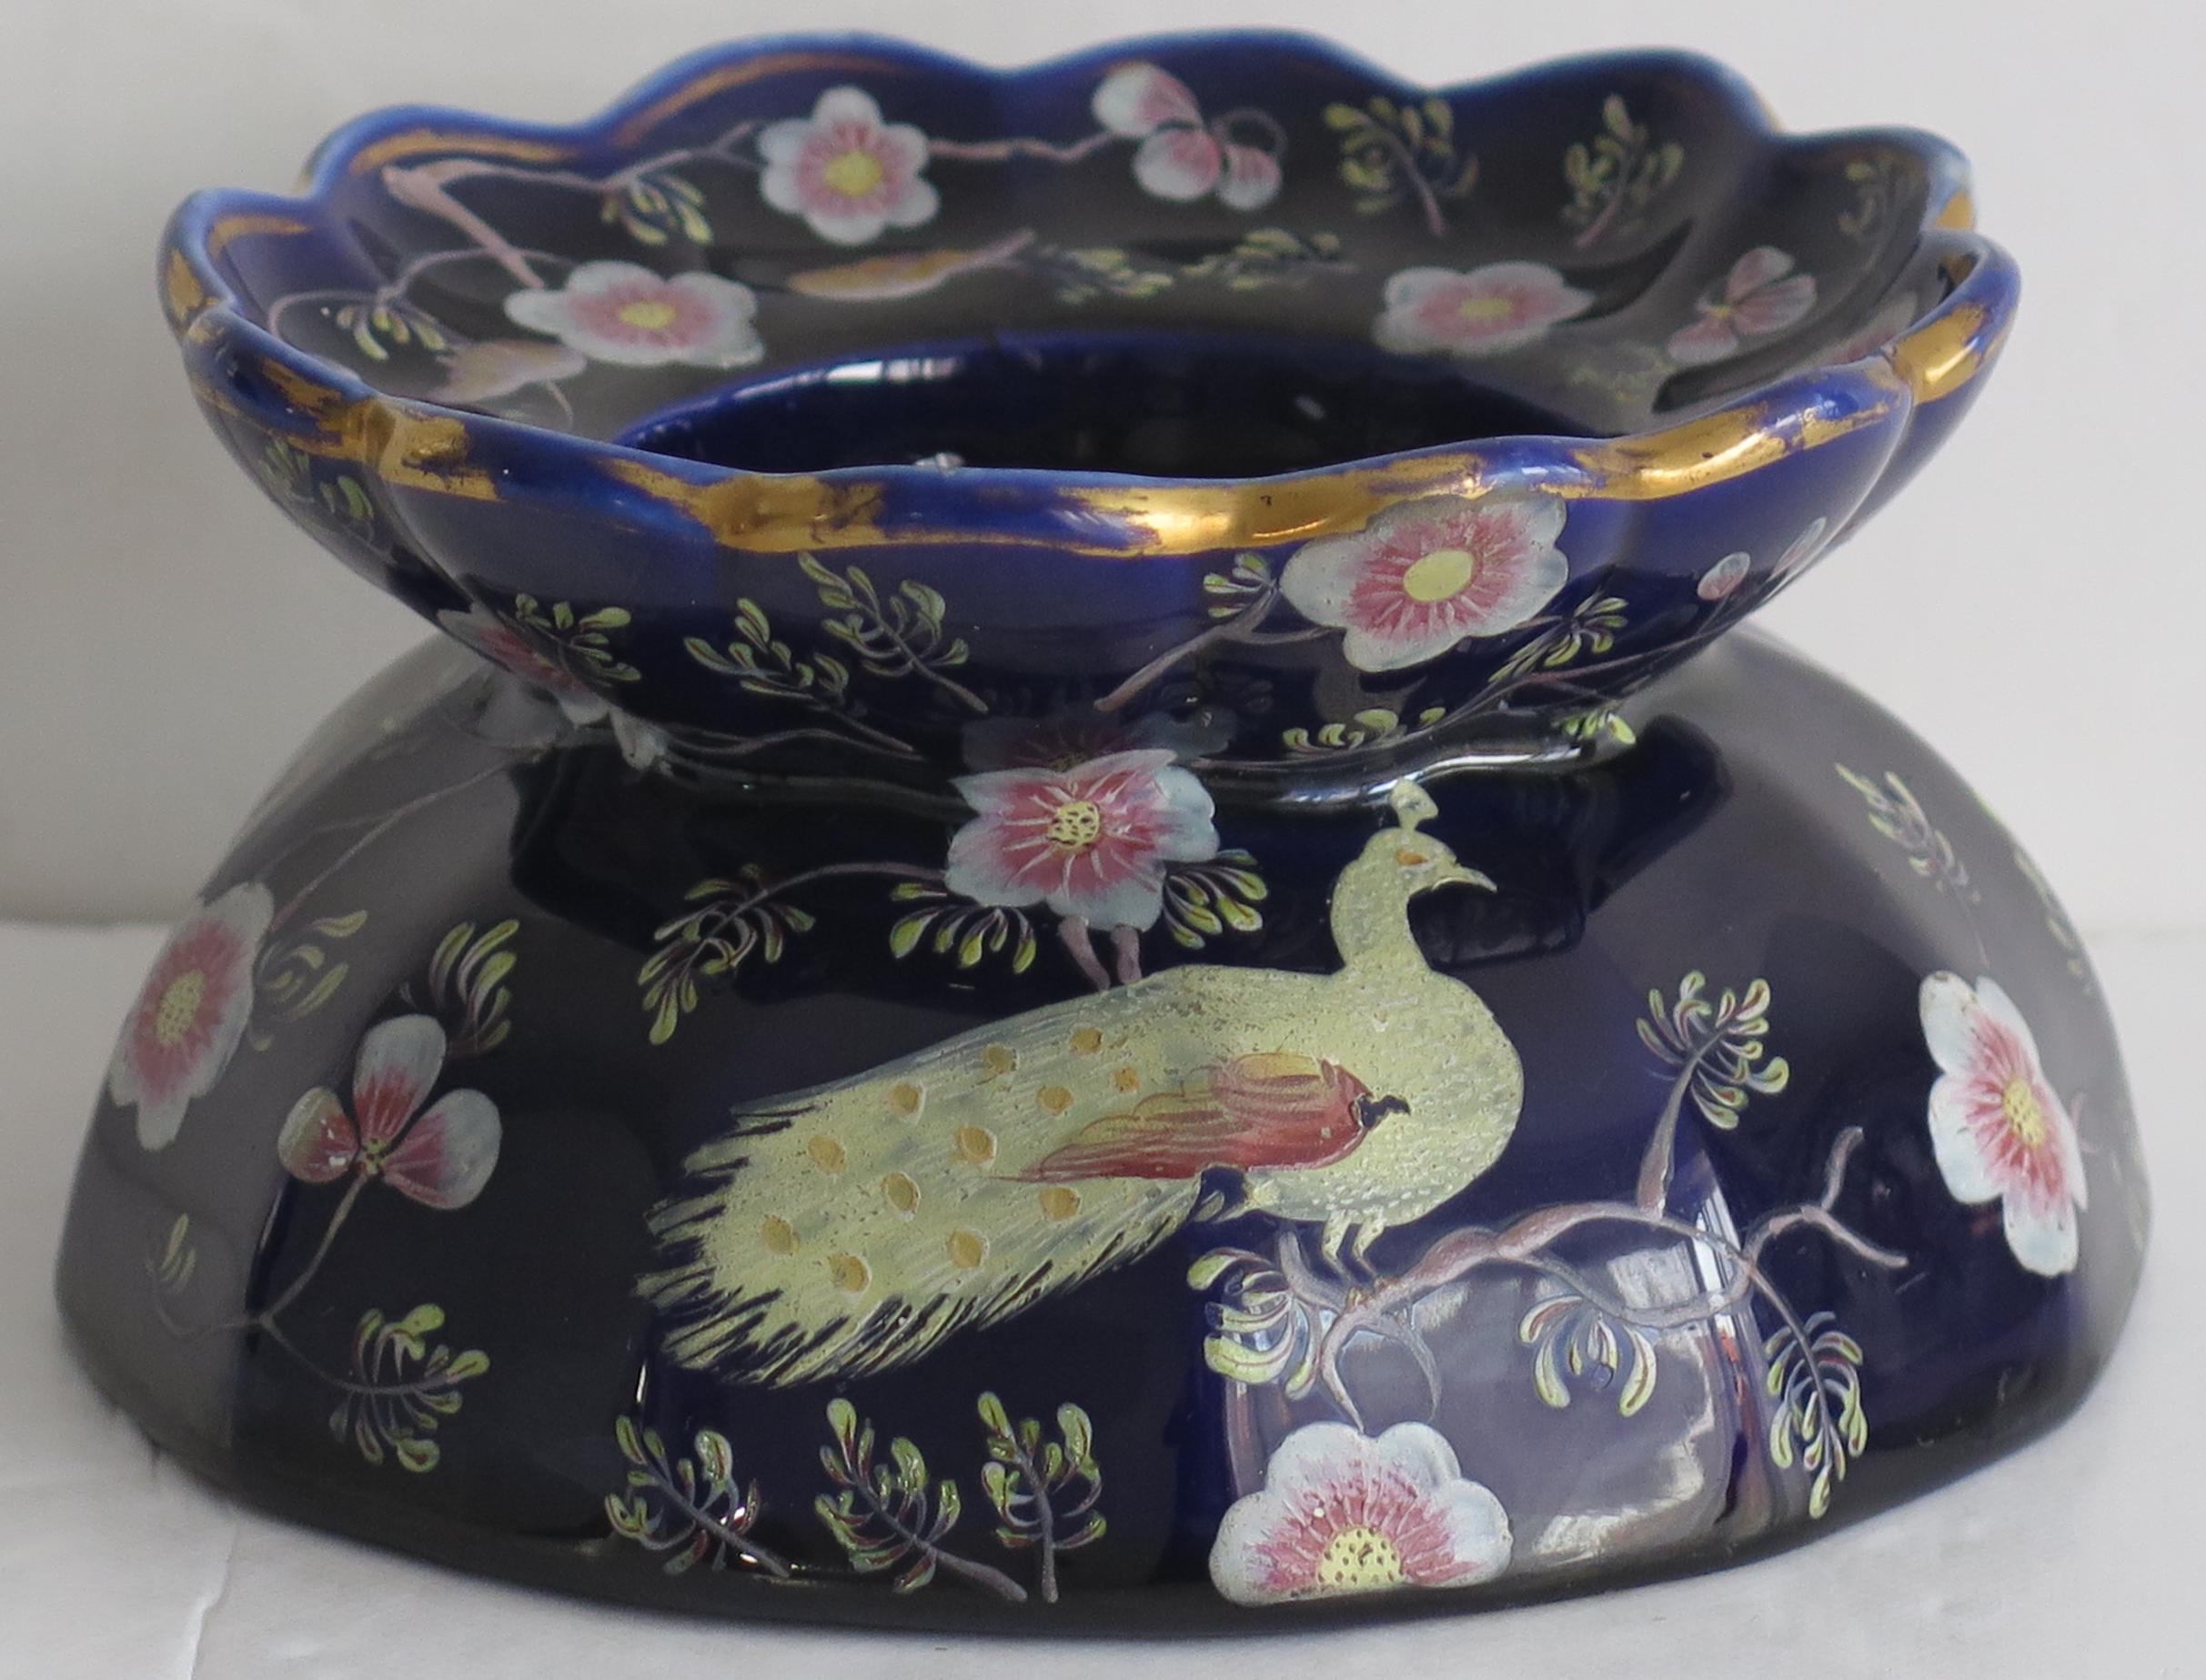 This is a very rare, ironstone Ink Well, all beautifully hand painted, made by Mason's, of Lane Delph, Staffordshire, England, circa 1815-1820. 

This piece is well potted as an open, vertically fluted dish and may have had an inner insert section